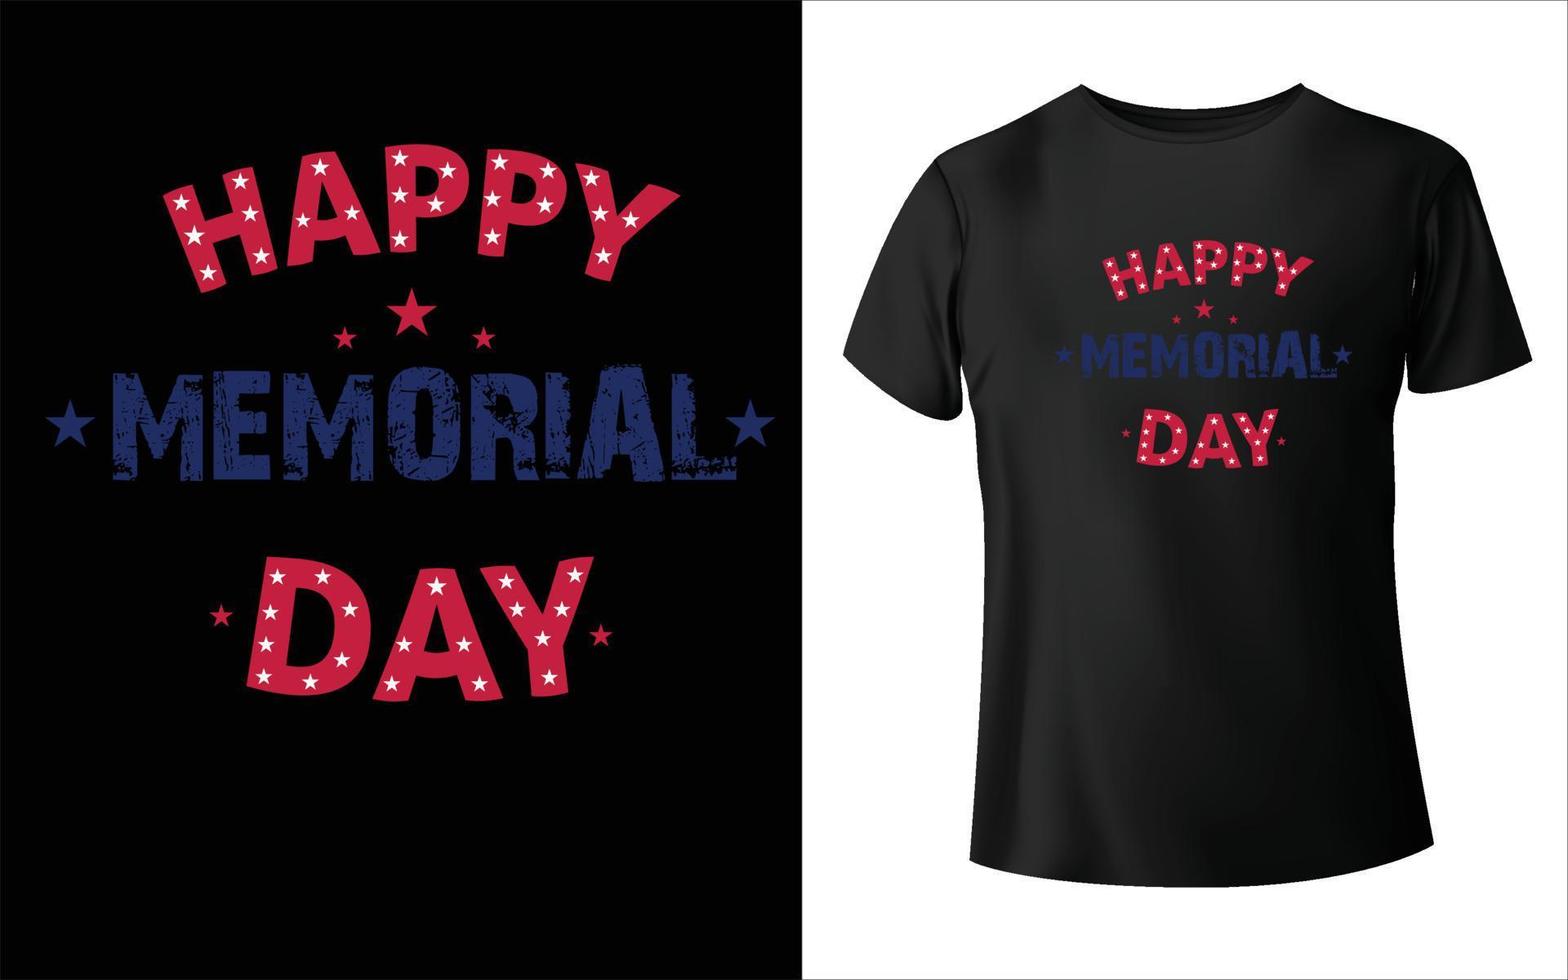 Happy memorial day t shirt, Vector, MEMORIAL DAY t-shirt design. Memorial day t-shirt design vector. For t-shirt print and other uses. Pro Vector